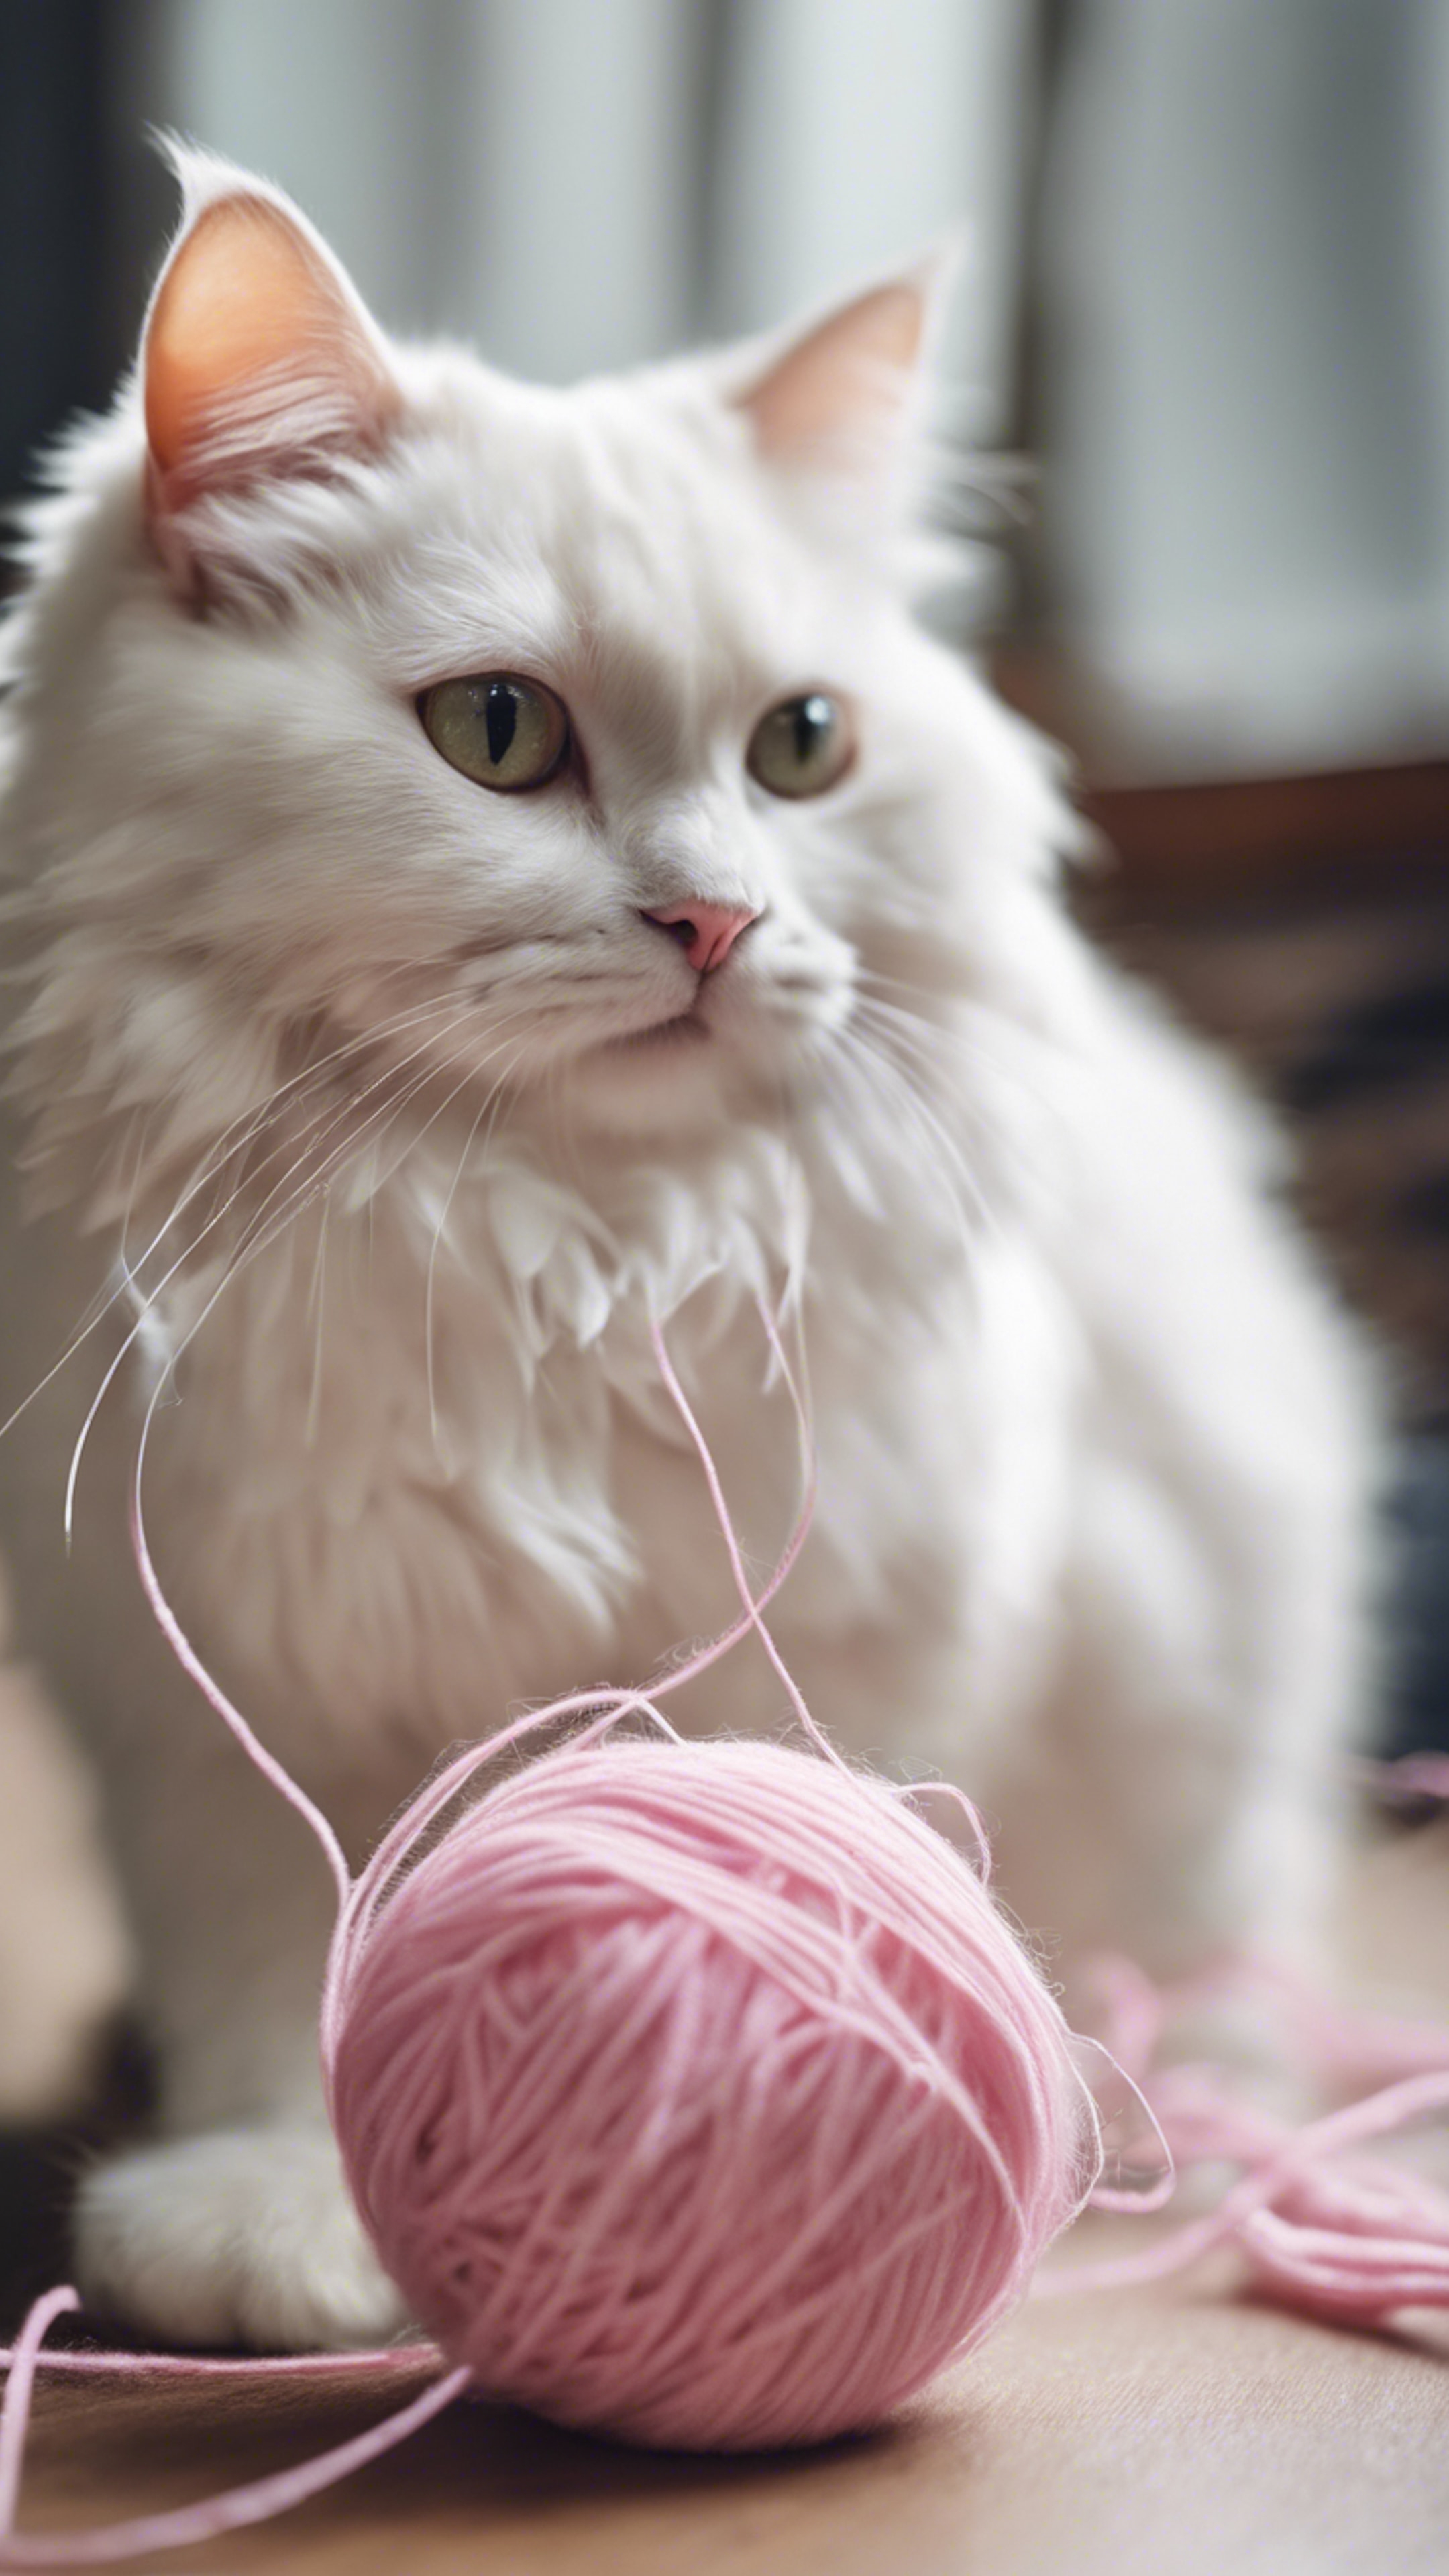 An adorable white cat, fluff all around, playing with a pink ball of yarn. Tapet[2f9056787526421e963d]